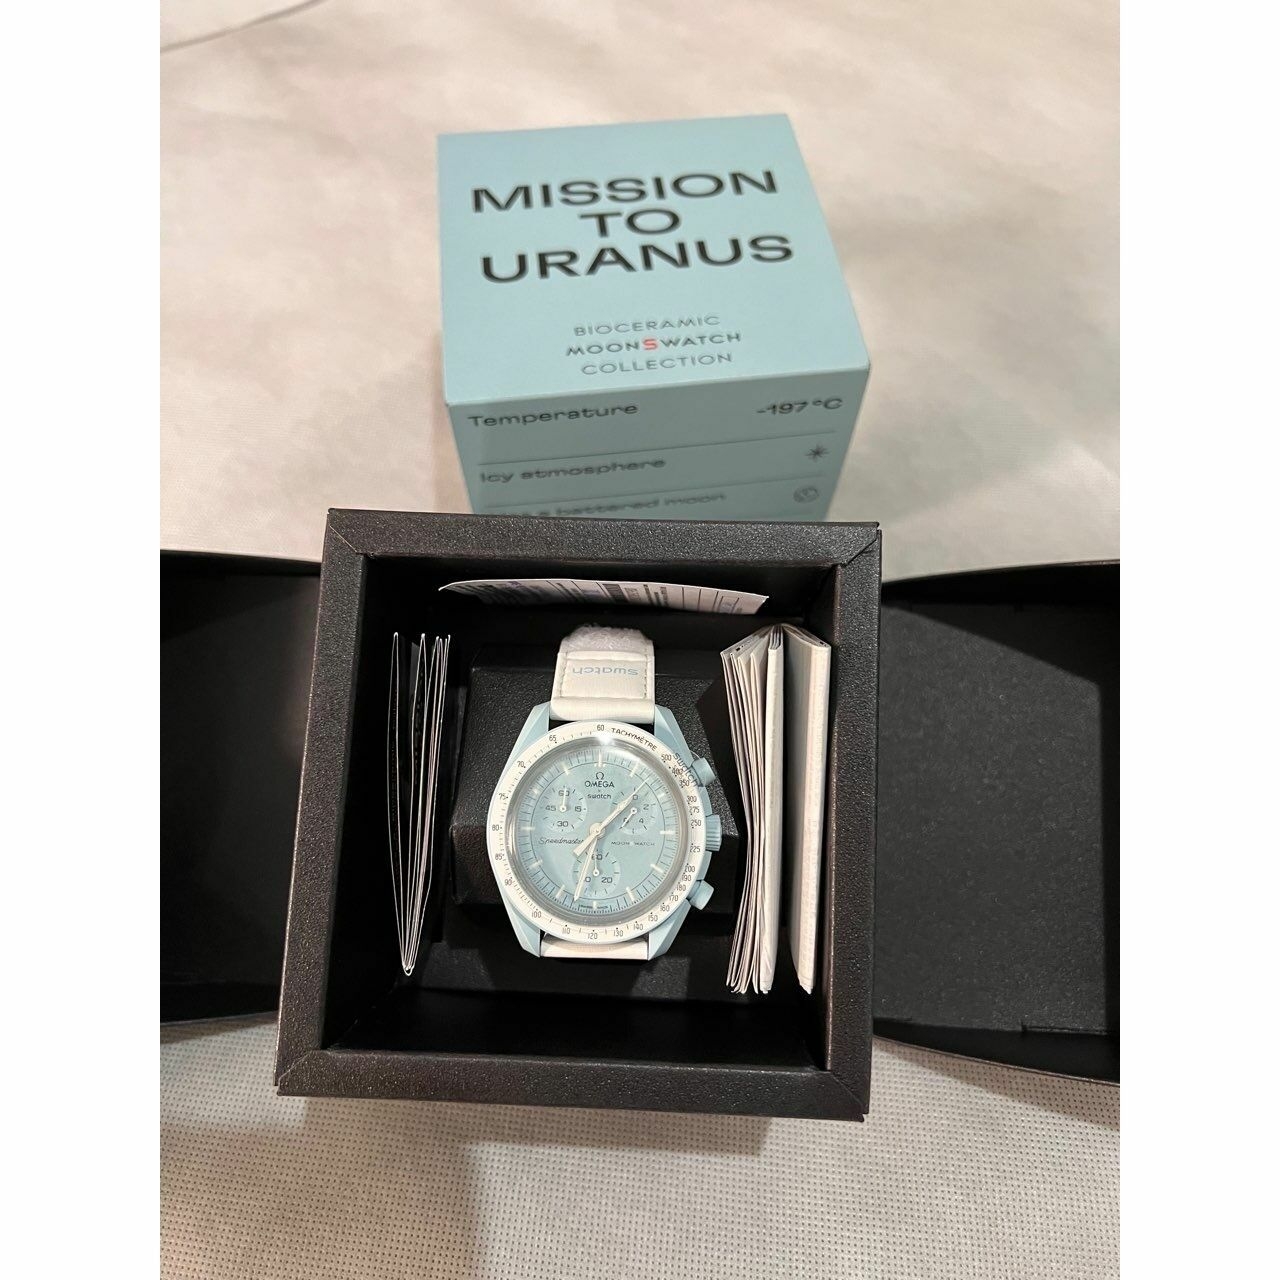 OMEGA SWATCH MISSION TO URANUS BIOCERAMIC MOONS WATCH COLLECTION 